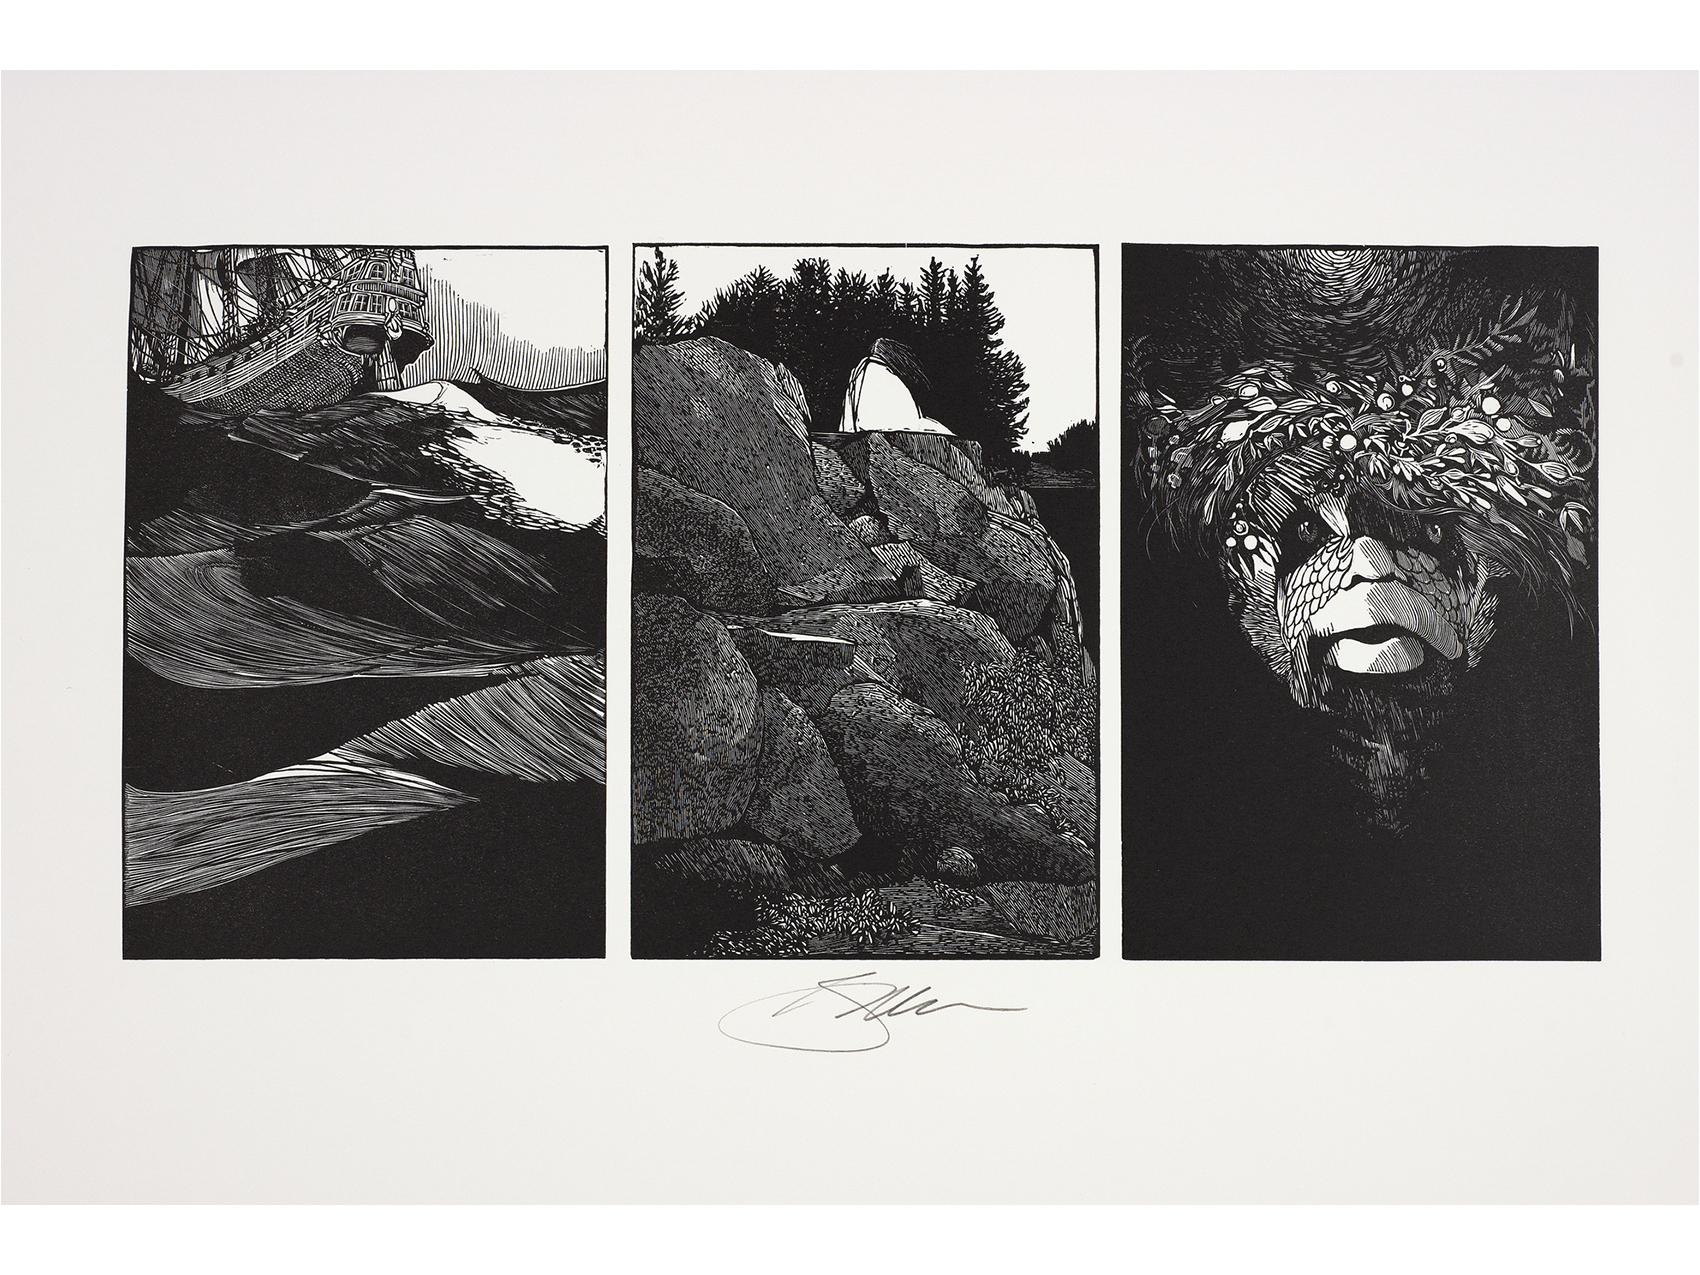 three images. left: a raggedy mountain. center: a girl in a white dress sitting at the top of a mountain. right: the face of a merman, with scales and ornamentation around his head